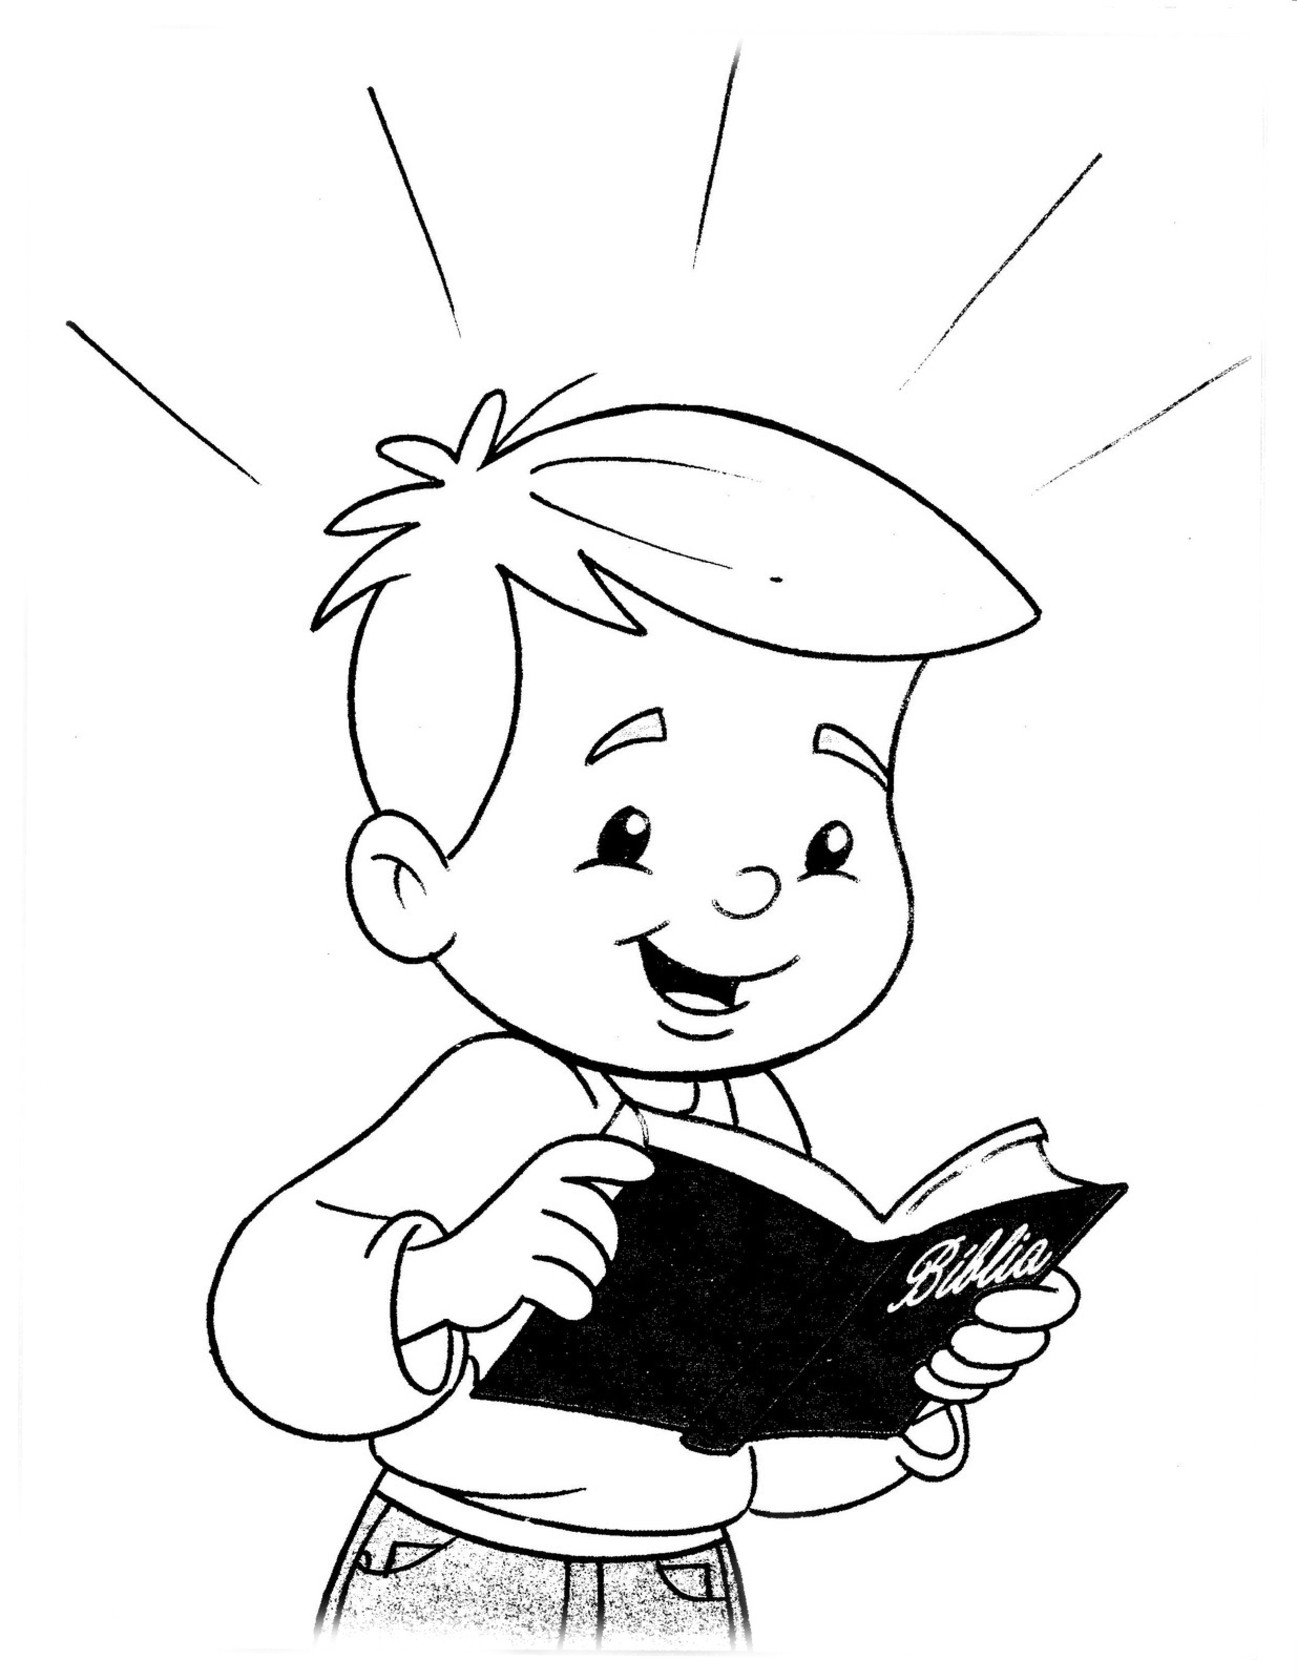 Free Printable Christian Coloring Pages for Kids - Best Coloring Pages